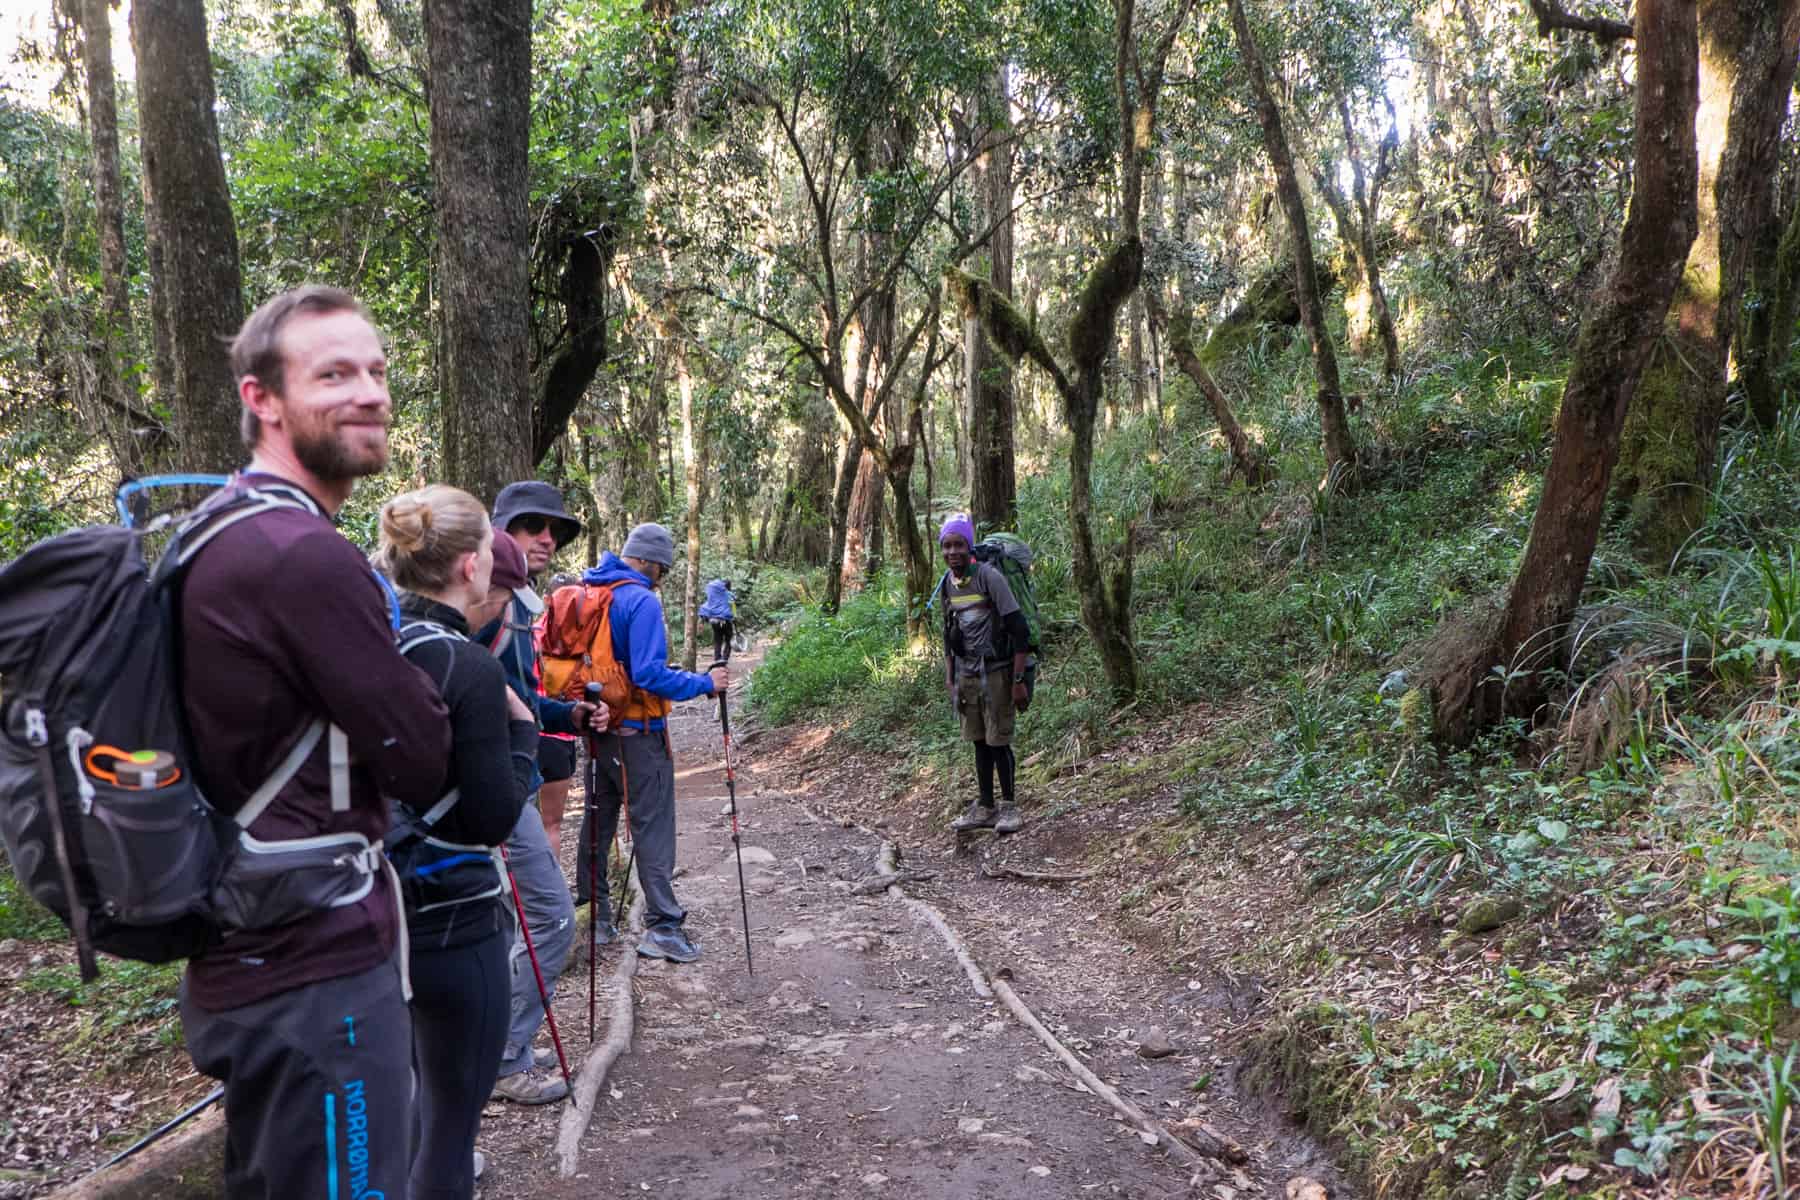 Five trekkers stand the left of a muddy trail path, and a guide, wearing a purple hat and carrying a green bag stands to the right.They are standing in the dense green Rainforest zone of Kilimanjaro.